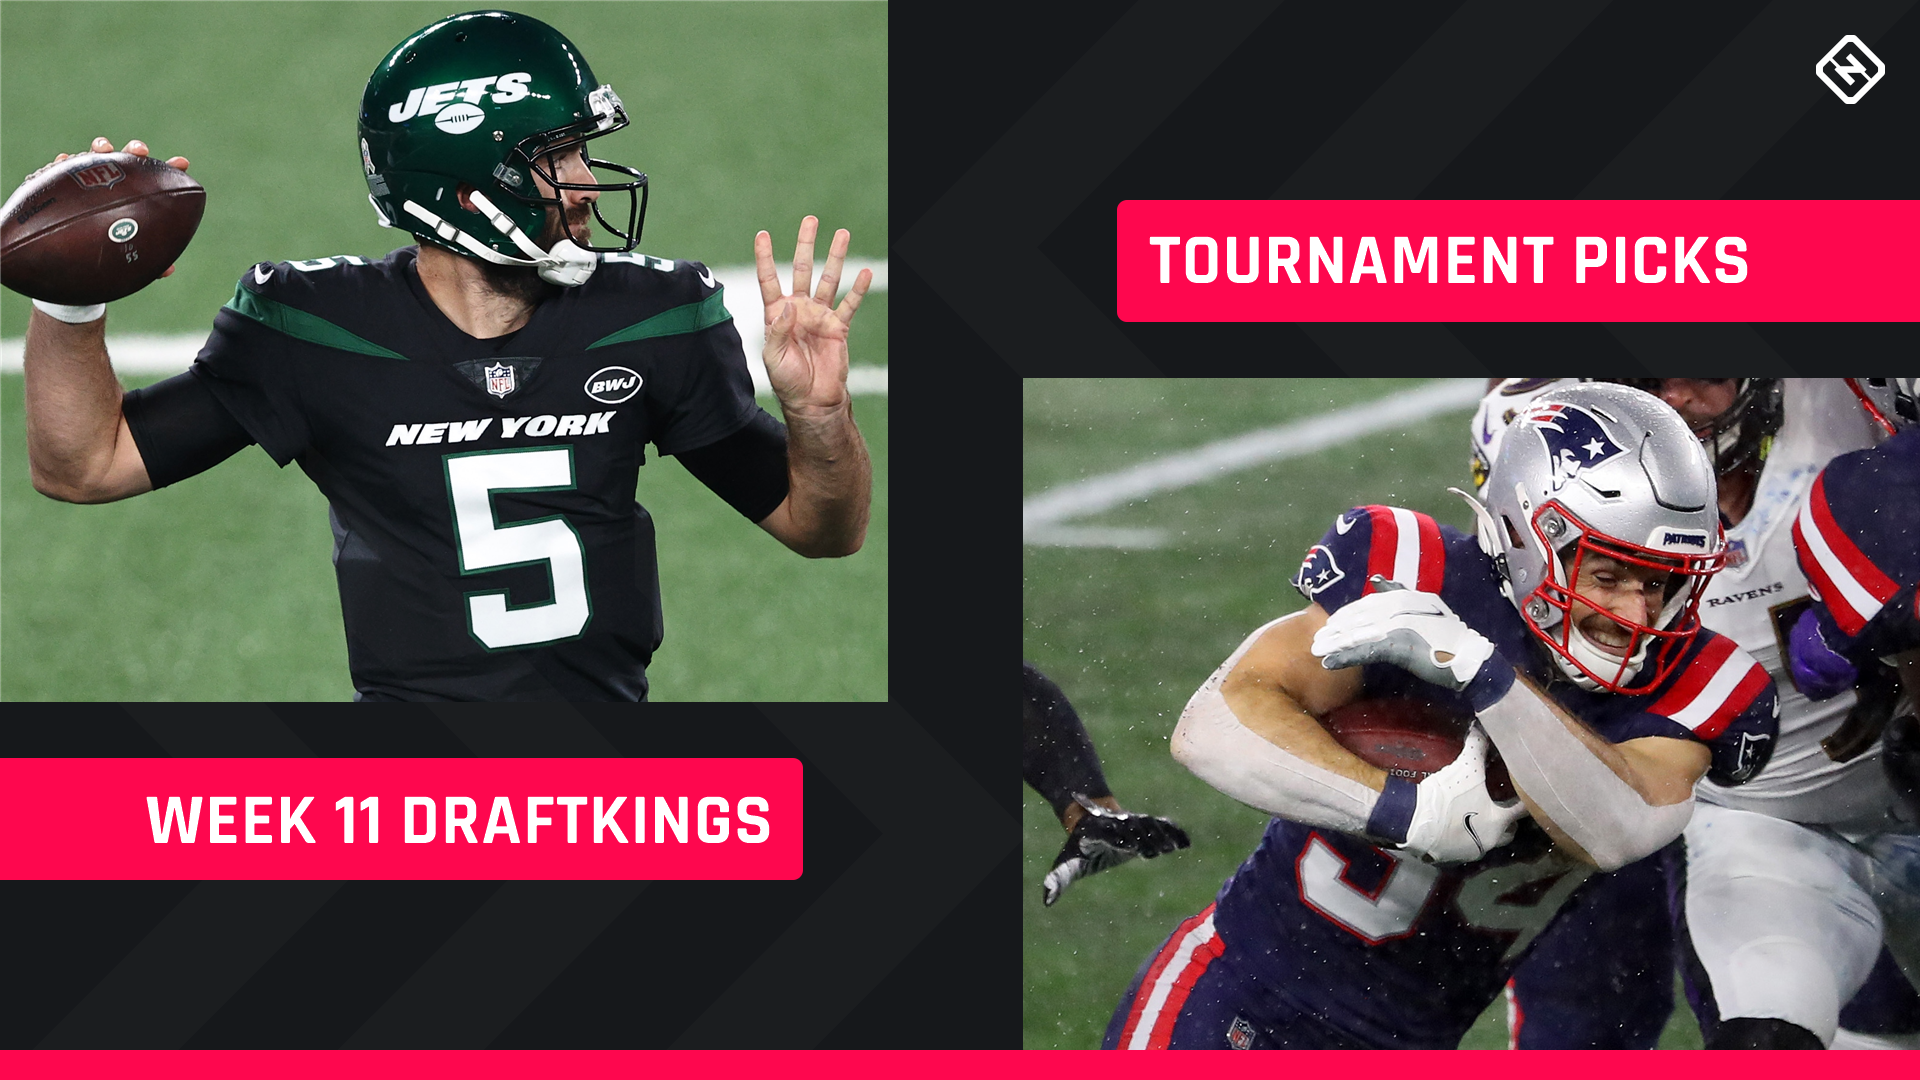 Draftkings Picks Week 11 Nfl Dfs Lineup Advice For Daily Fantasy Football Tournaments Sporting News